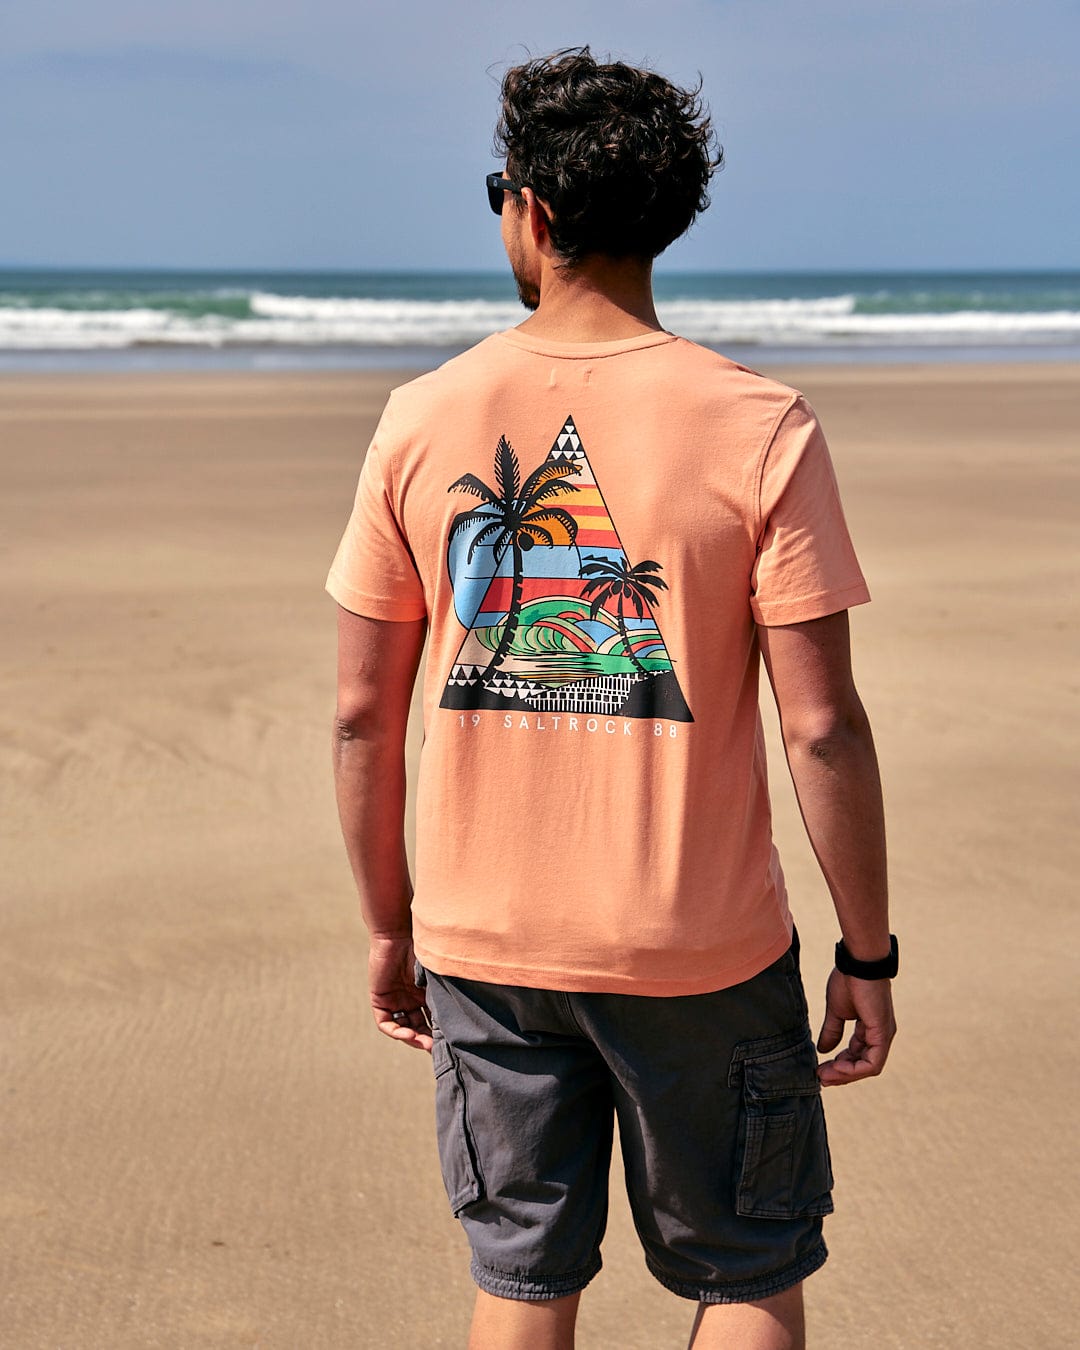 A man walking on the beach wearing a Saltrock Geo Beach - Mens Short Sleeve T-Shirt - Coral with a palm tree on it.